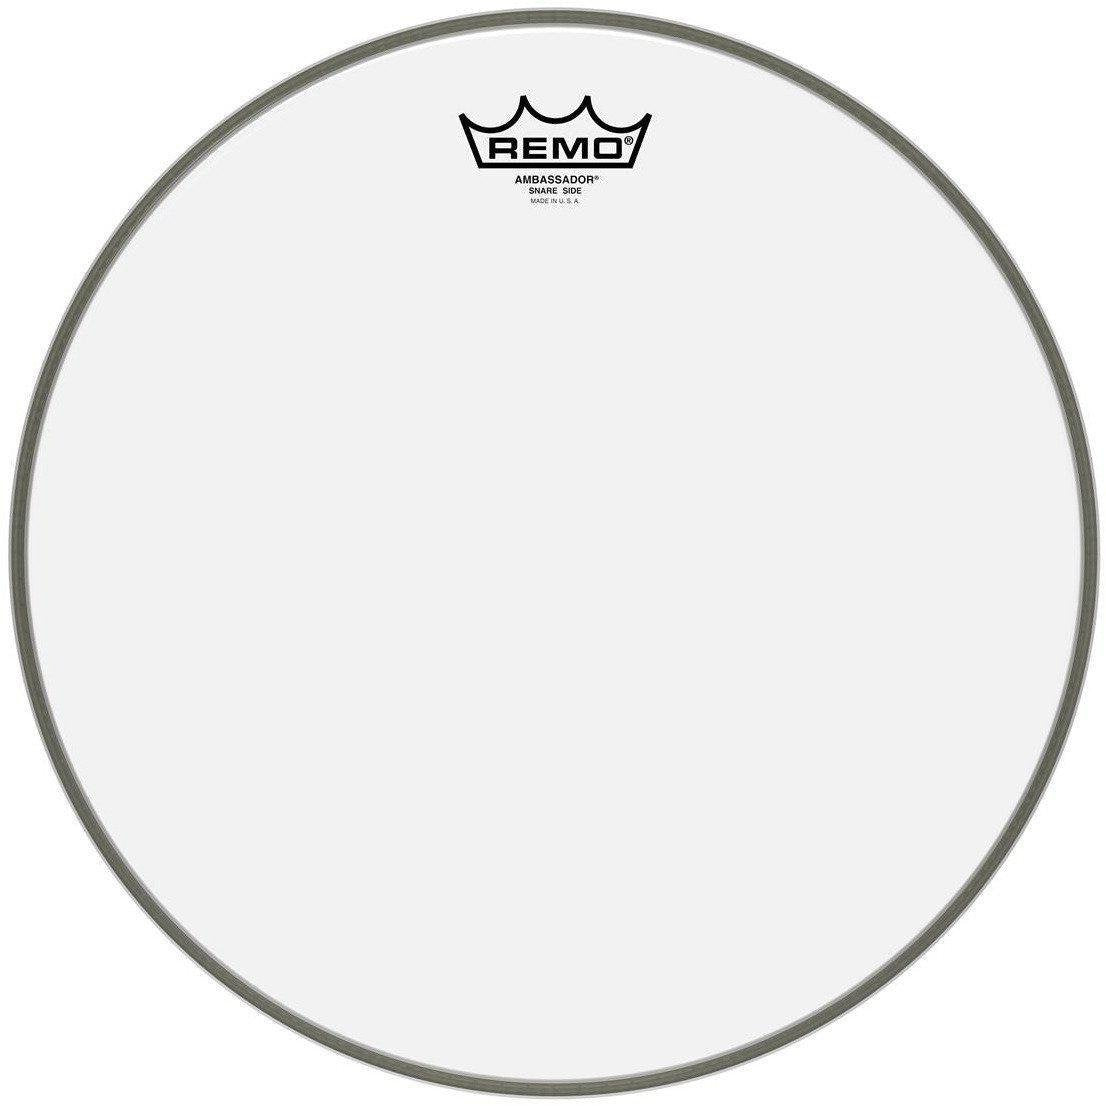 Remo Ambassador Clear Snare-side 14in Drumhead - SA031400-Andy's Music